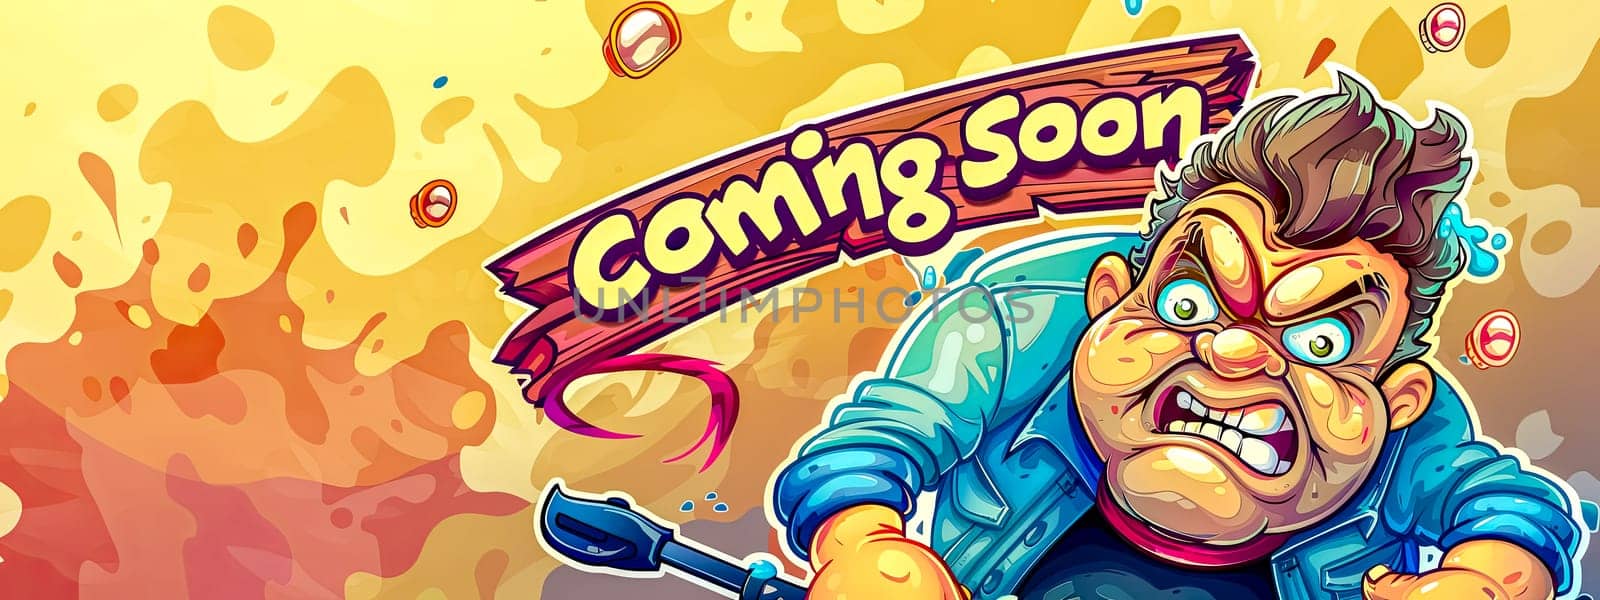 Excited cartoon cyclist with coming soon banner by Edophoto